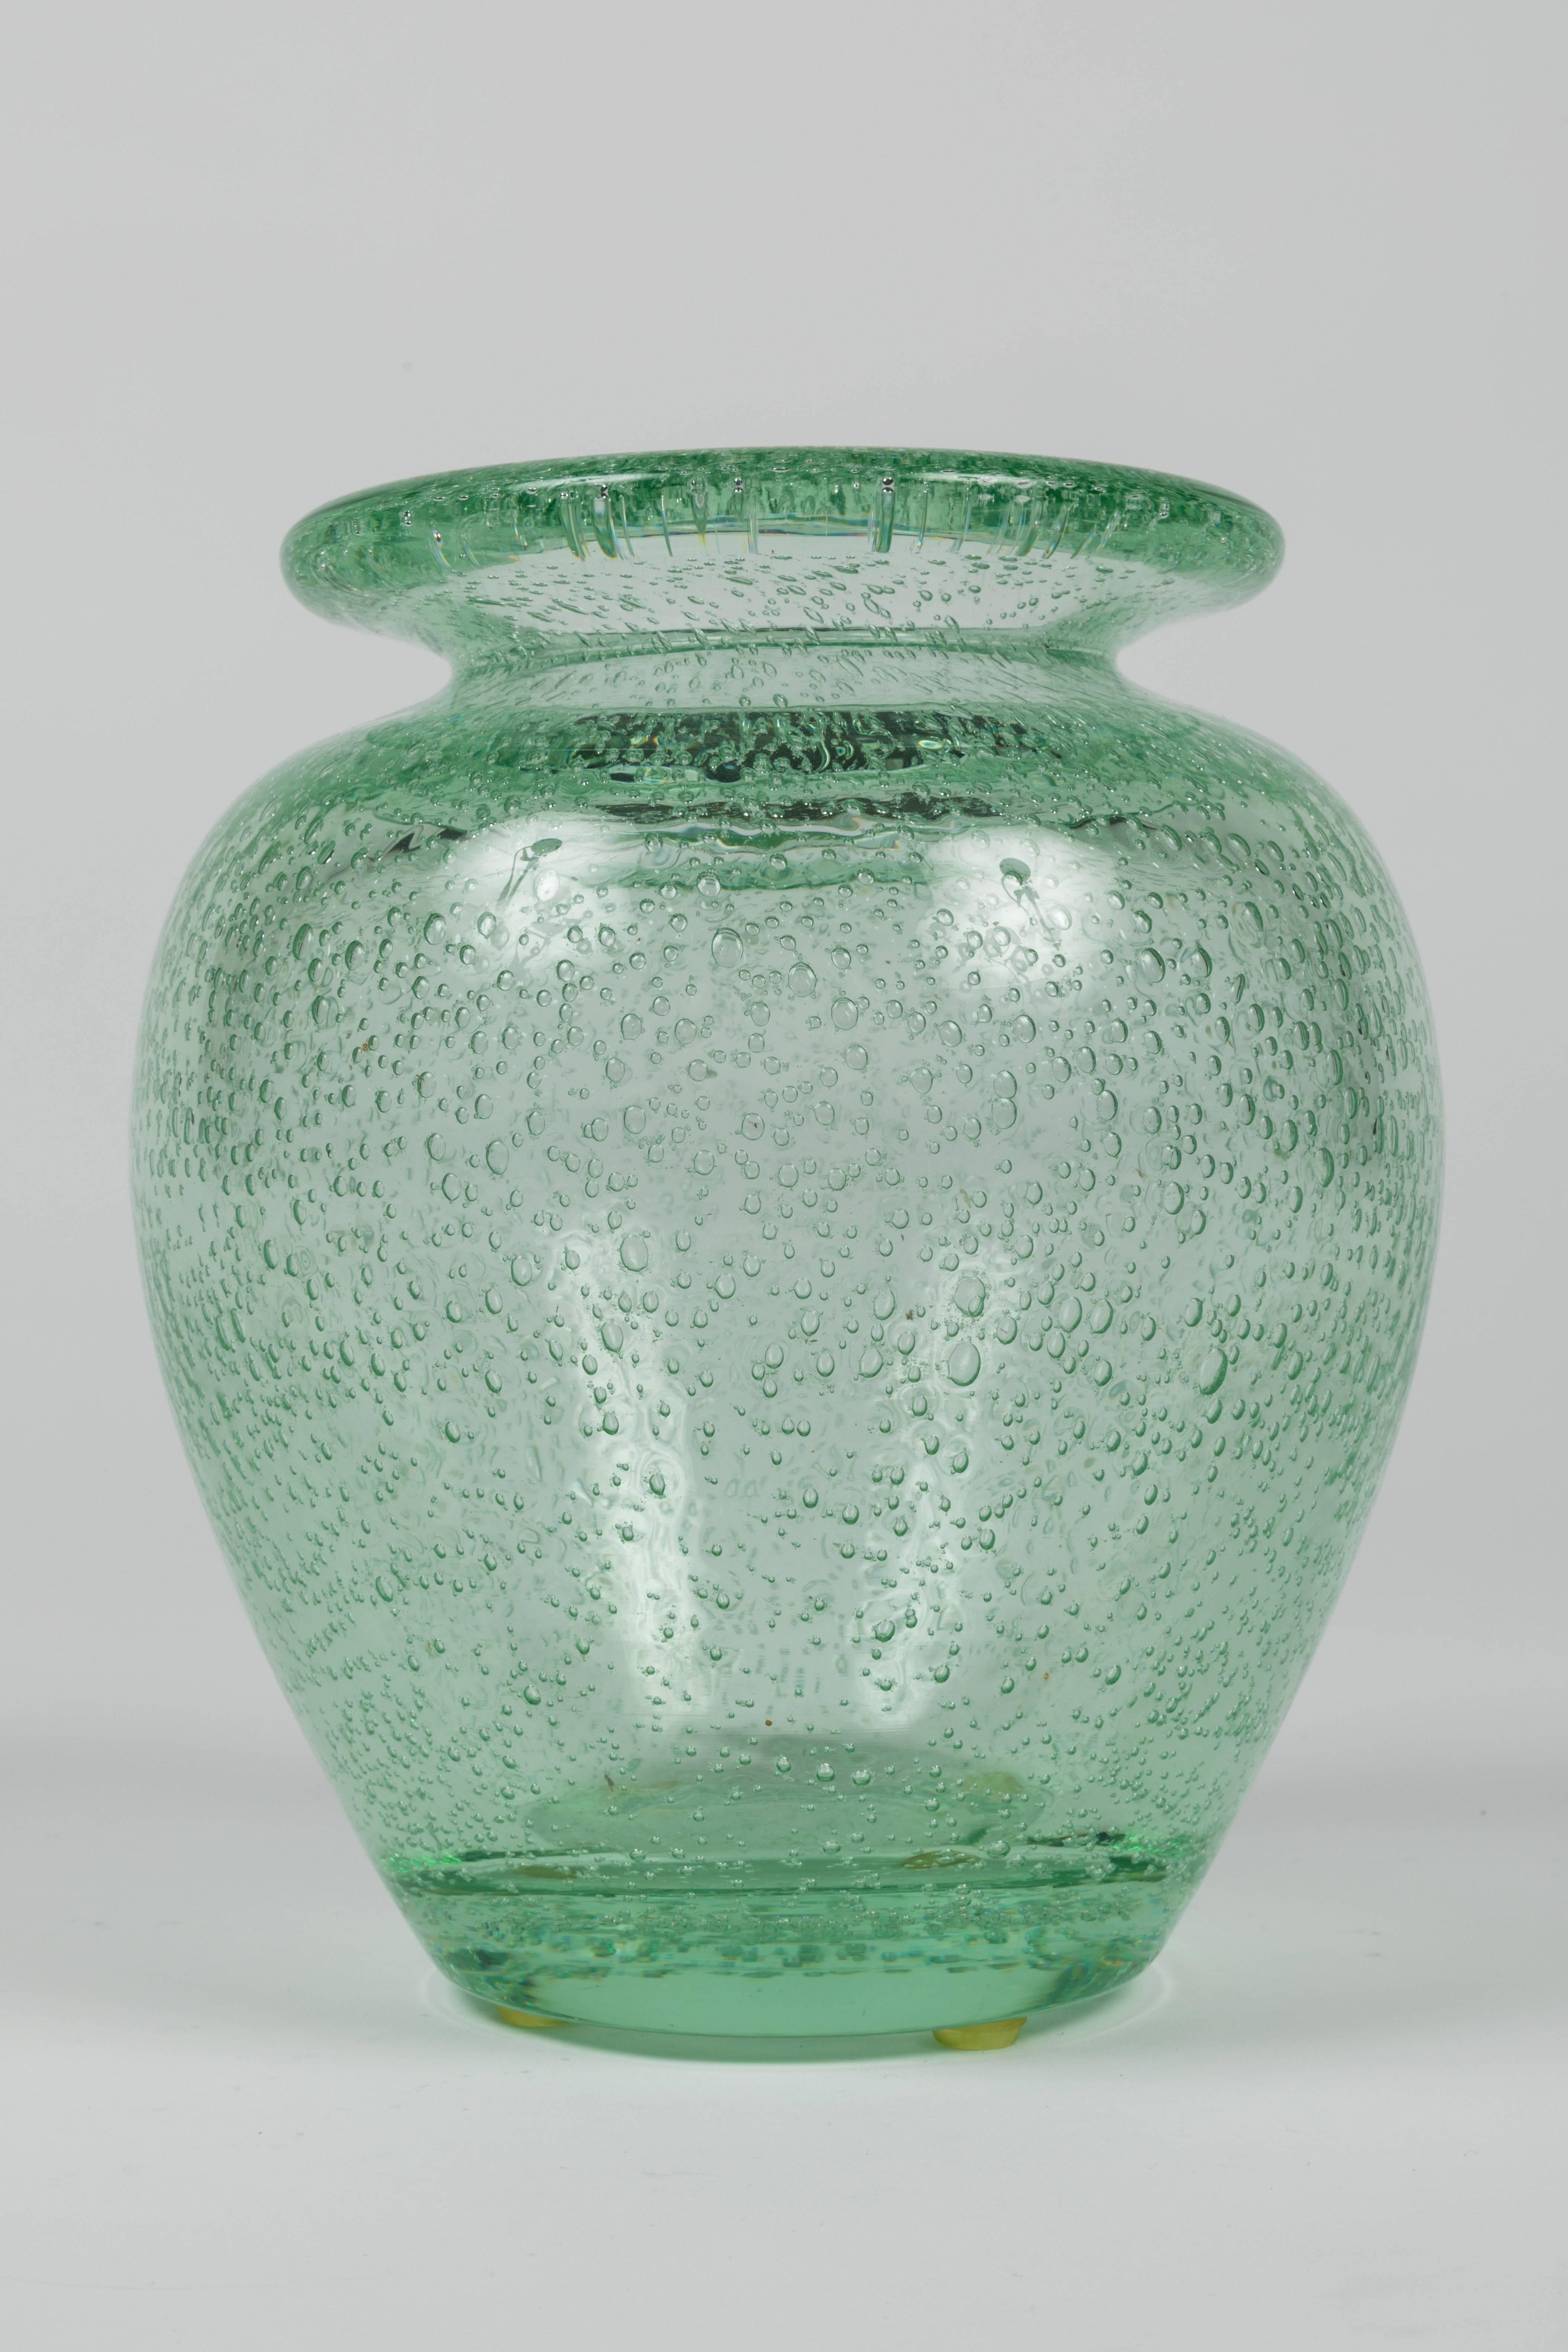 Wonderful shouldered vase with a thick turned lip in clear green glass with wonderful trapped air bubbles. Signed along the side bottom 